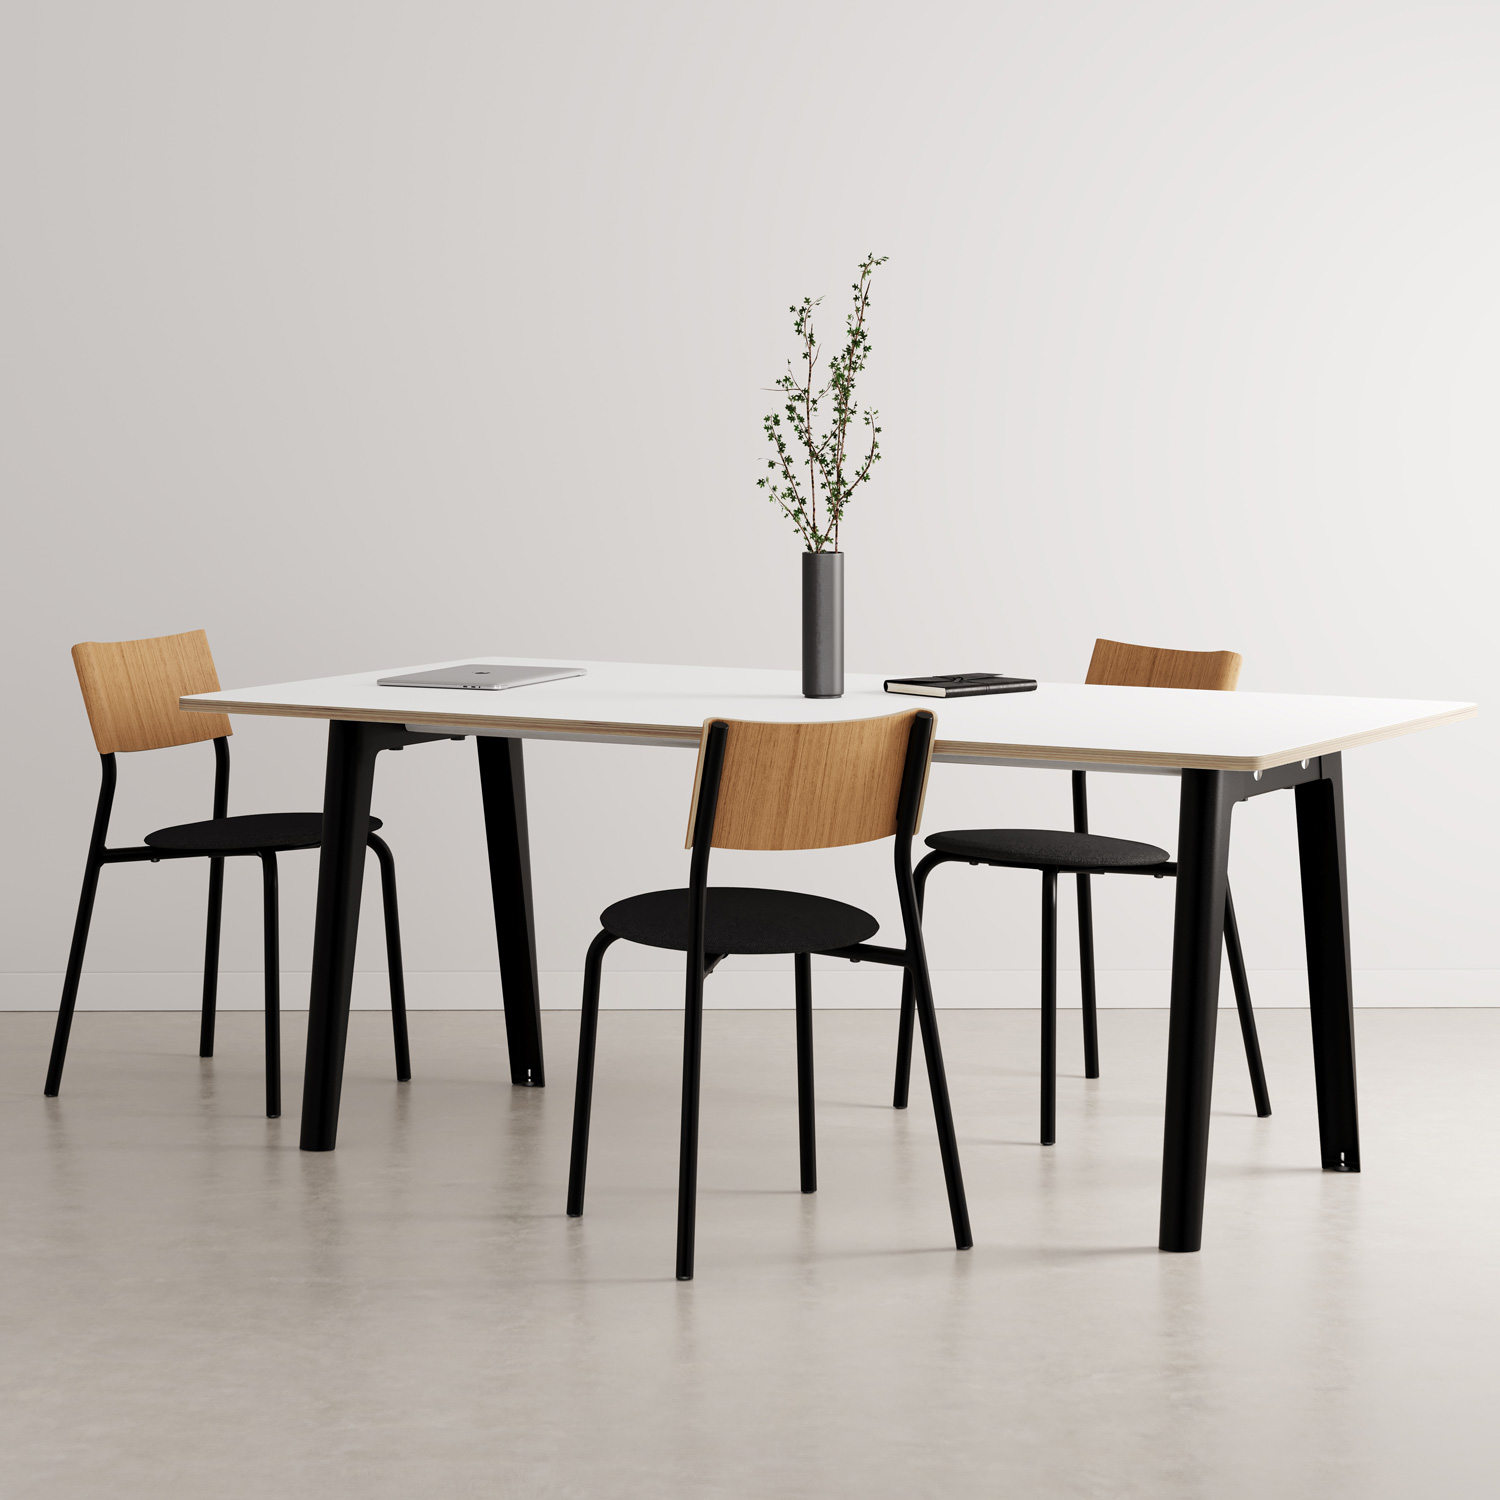 NEW MODERN meeting table – white plywood